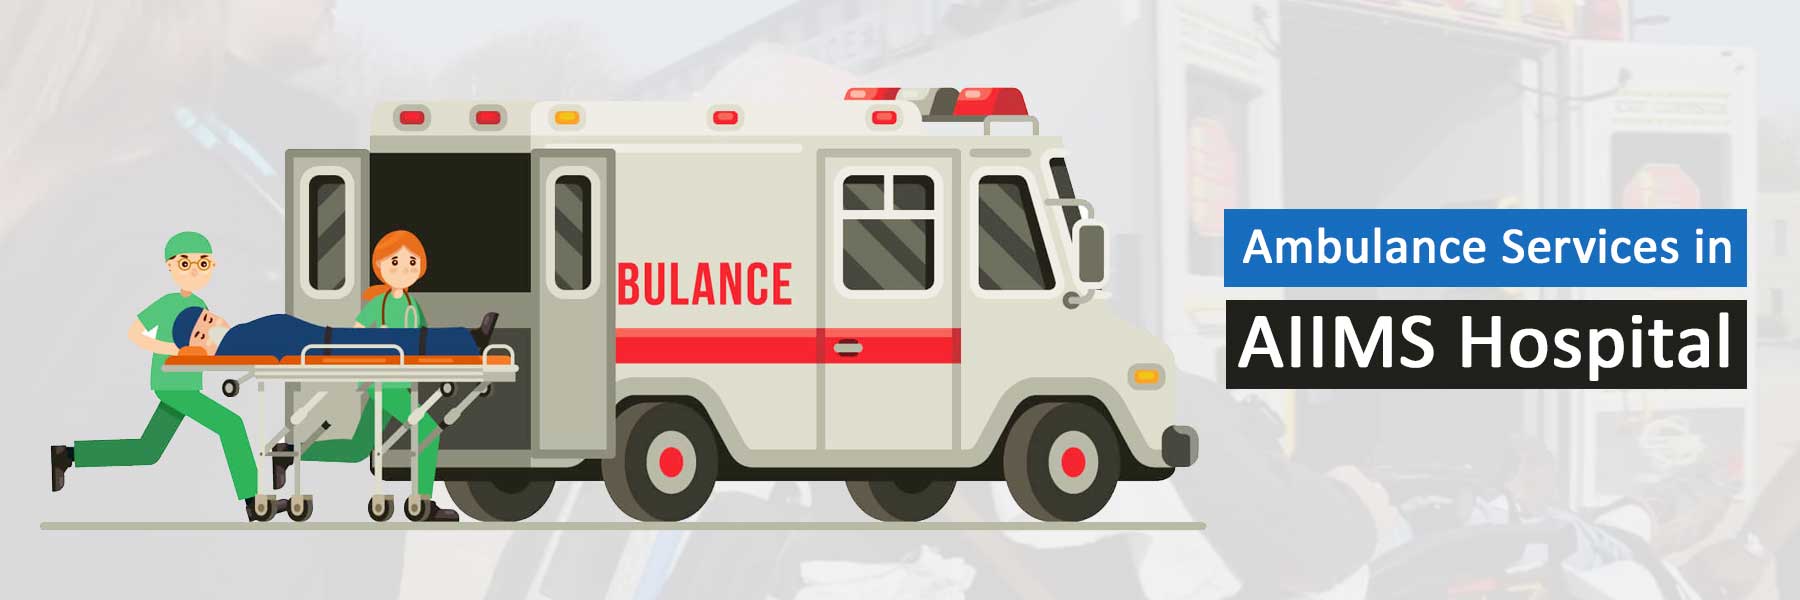 Ambulance Service in Delhi NCR by Road -Life Express-23